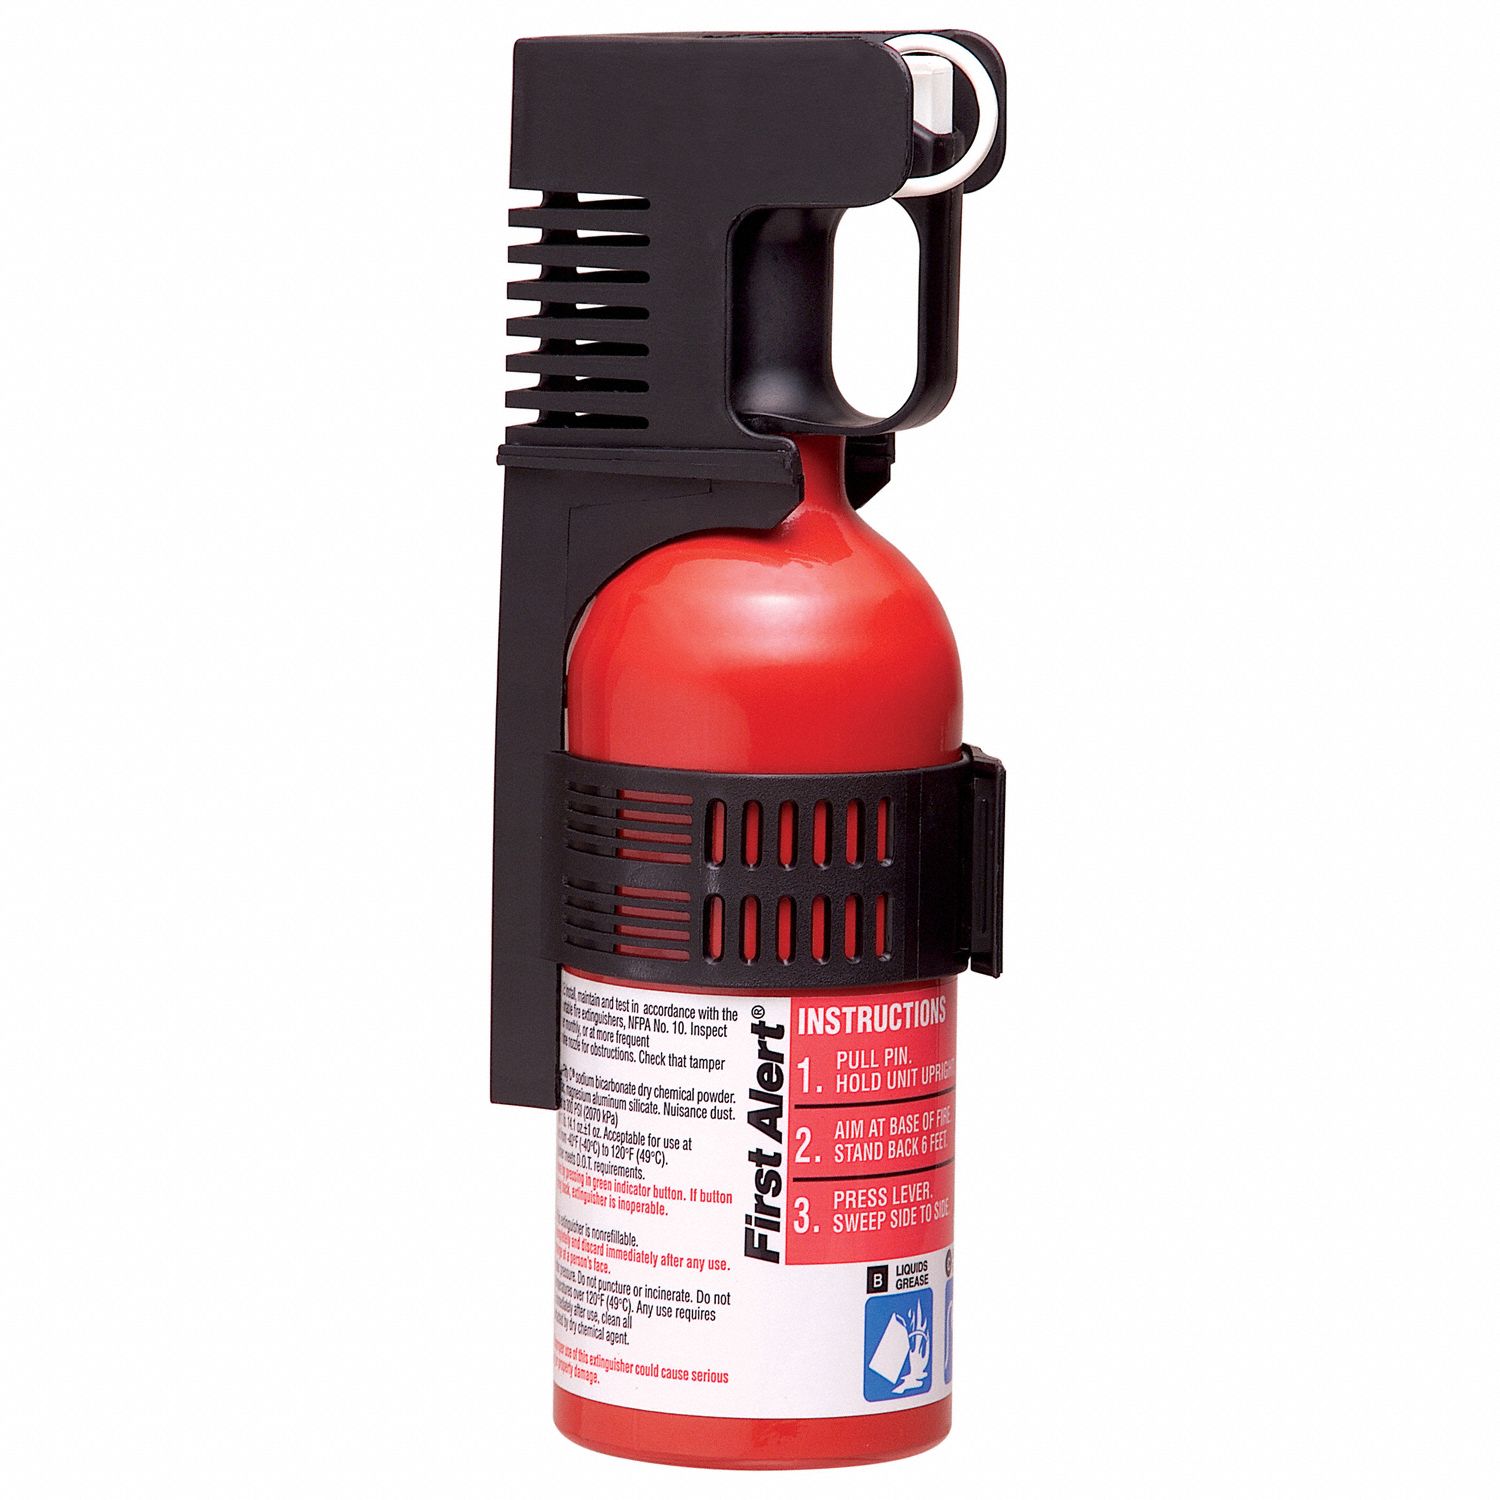 FIRST ALERT Fire Extinguisher, Dry Chemical, Sodium